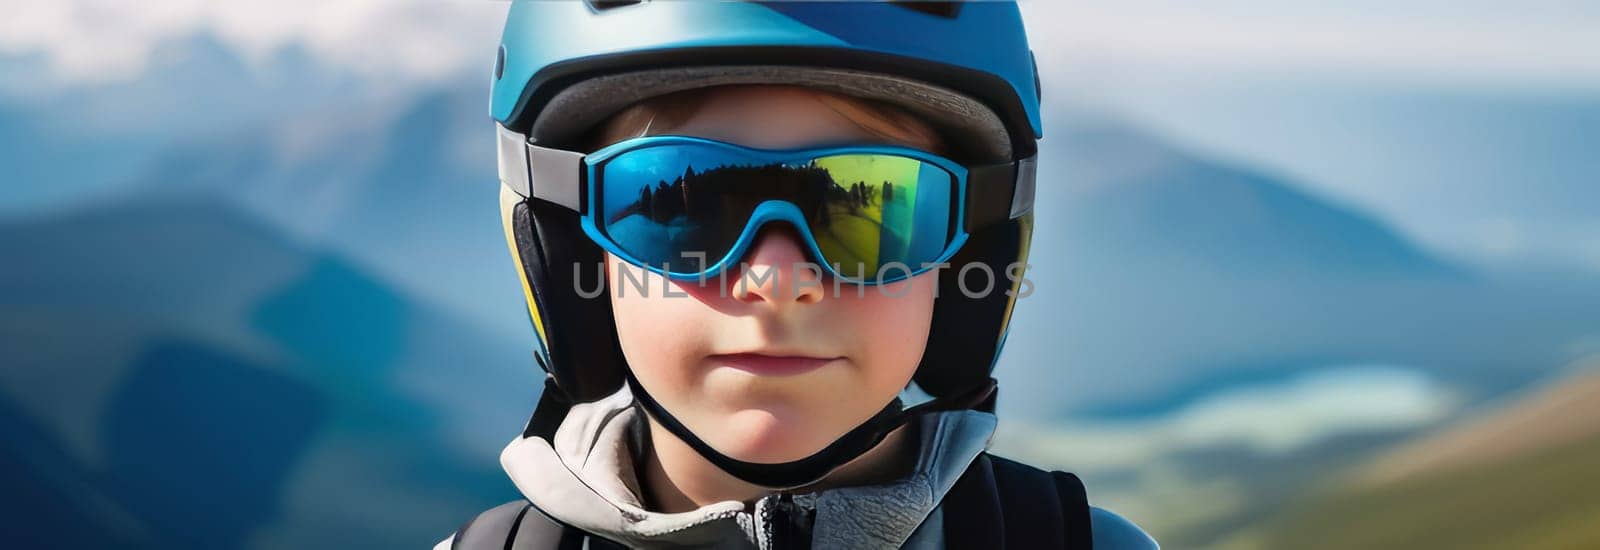 Young boy wearing helmet and sunglasses glasses stands confidently before towering mountain backdrop ready for adventure, exploration. He may be gearing up for bicycle ride, other outdoor activity. by Angelsmoon